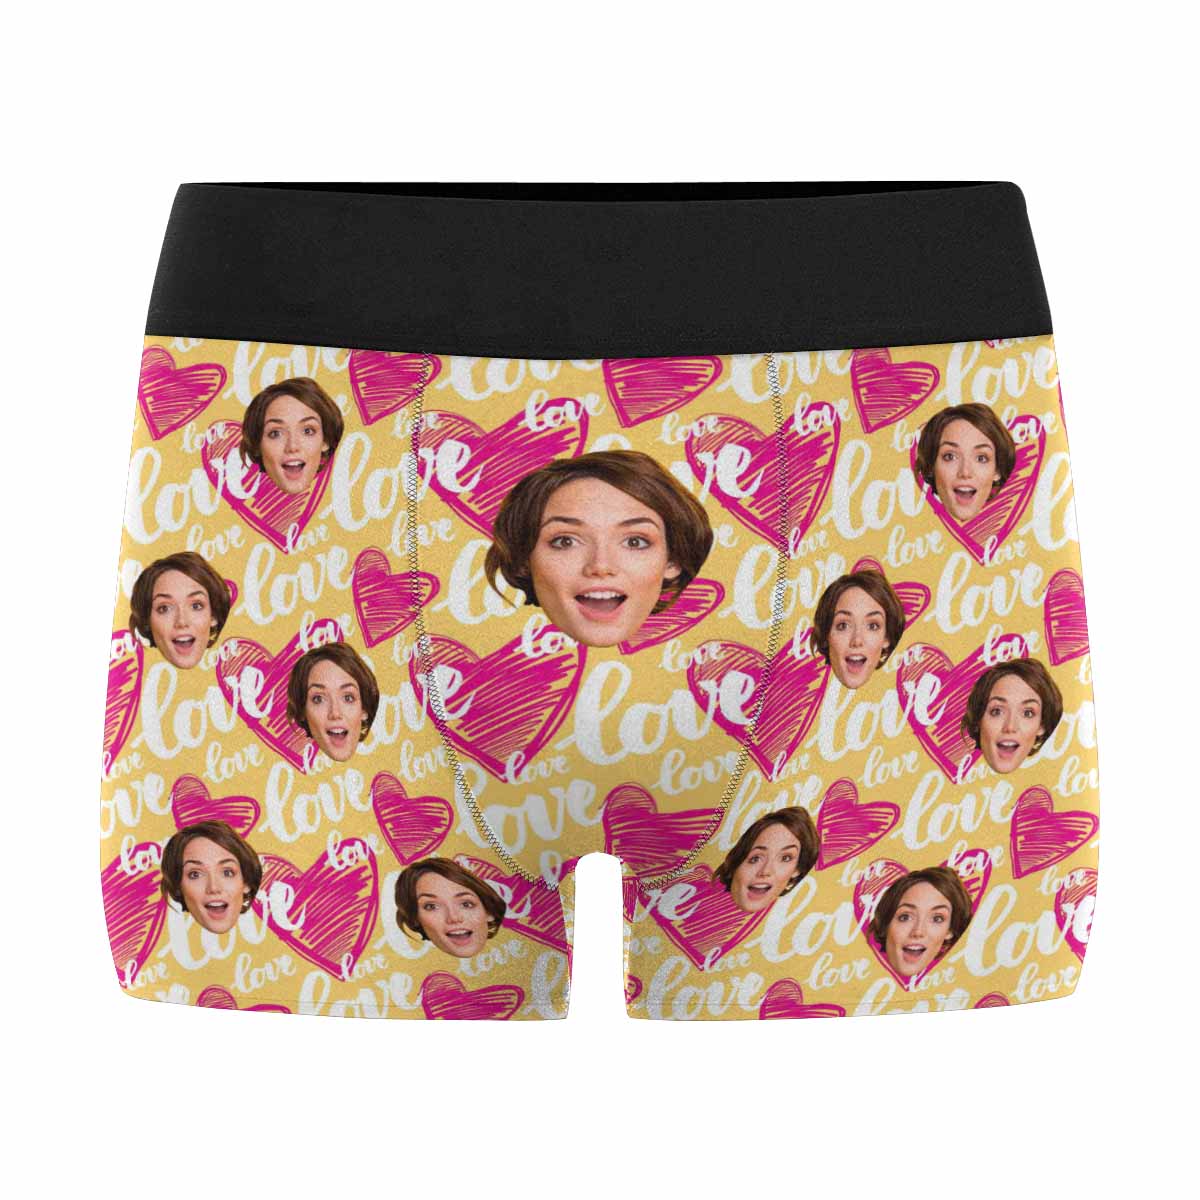 Custom Face Boxers Multi Girlfriend Face Printed Photo Custom Underwear For  Men Boxer Underwear With Faces On Them Custom Gifts For Men / Boyfriend